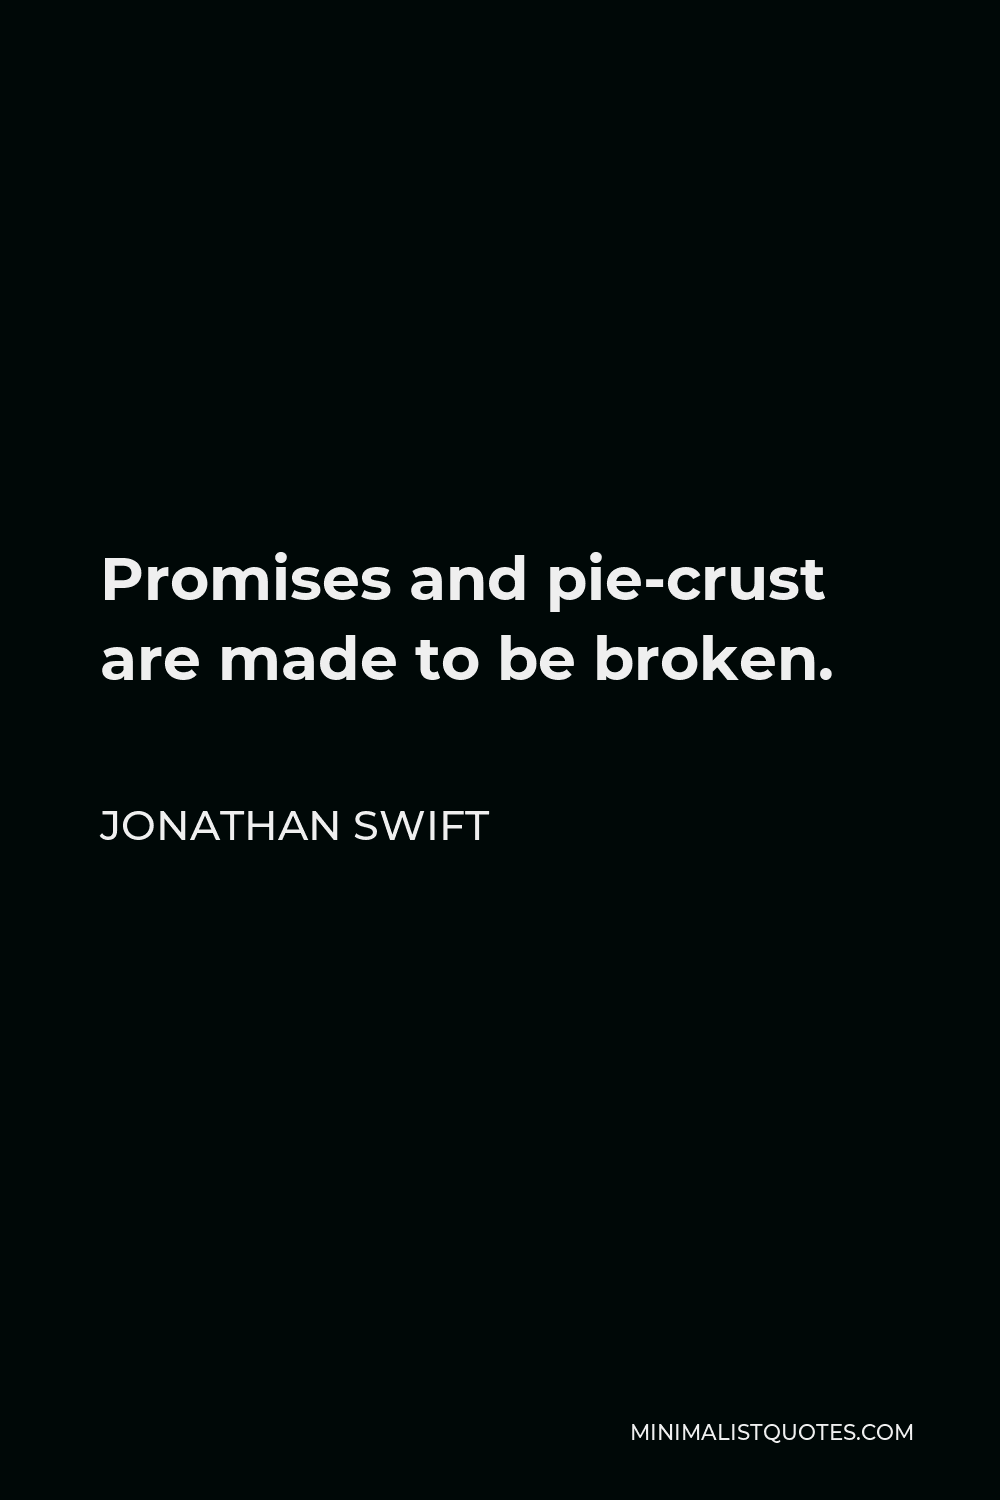 Jonathan Swift Quote - Promises and pie-crust are made to be broken.